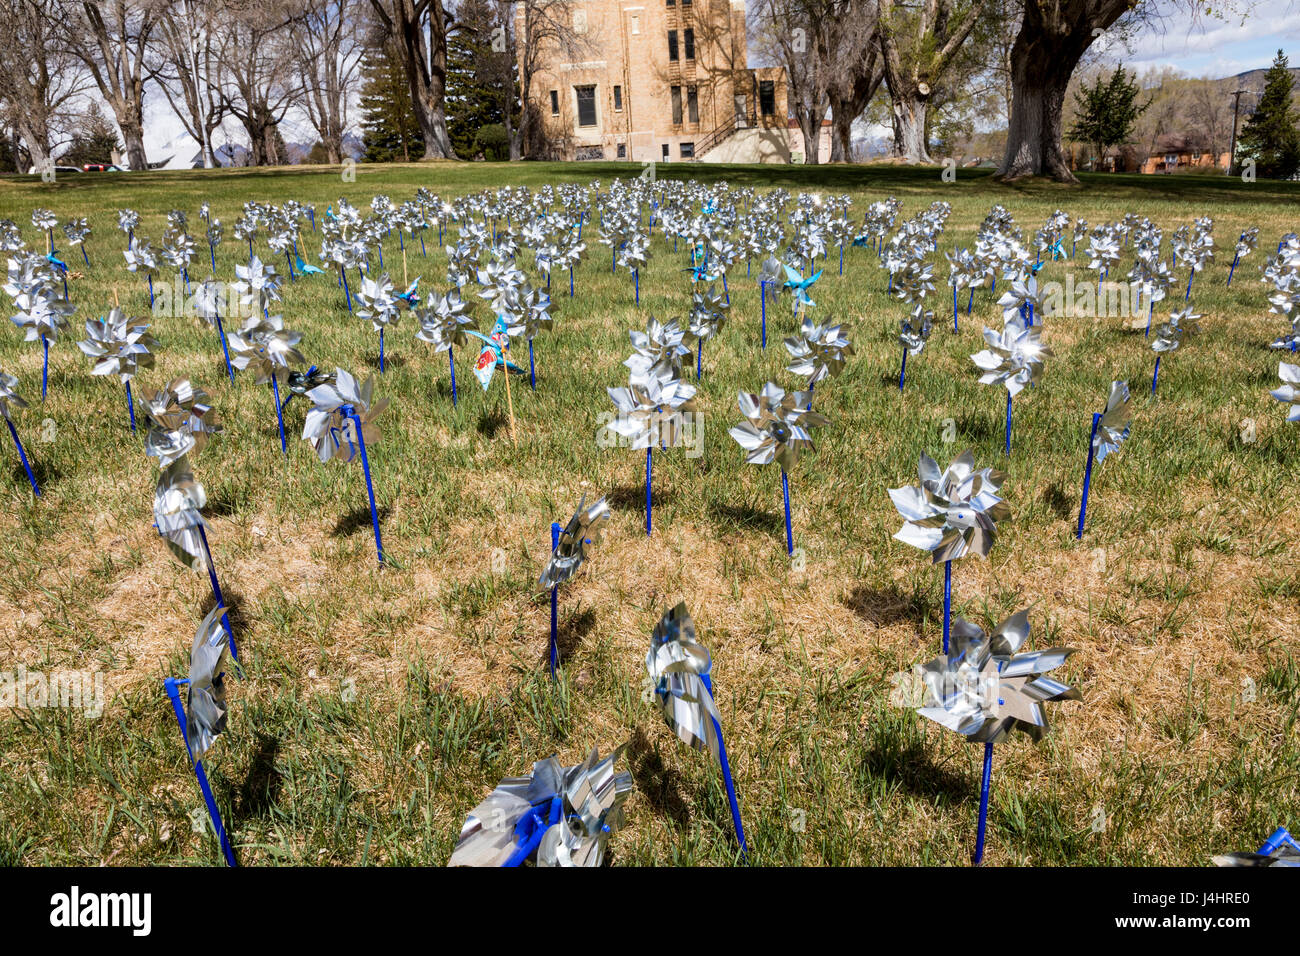 Pinwheels for Prevention, symbols for Prevention Against Child Abuse month, central Colorado, USA Stock Photo